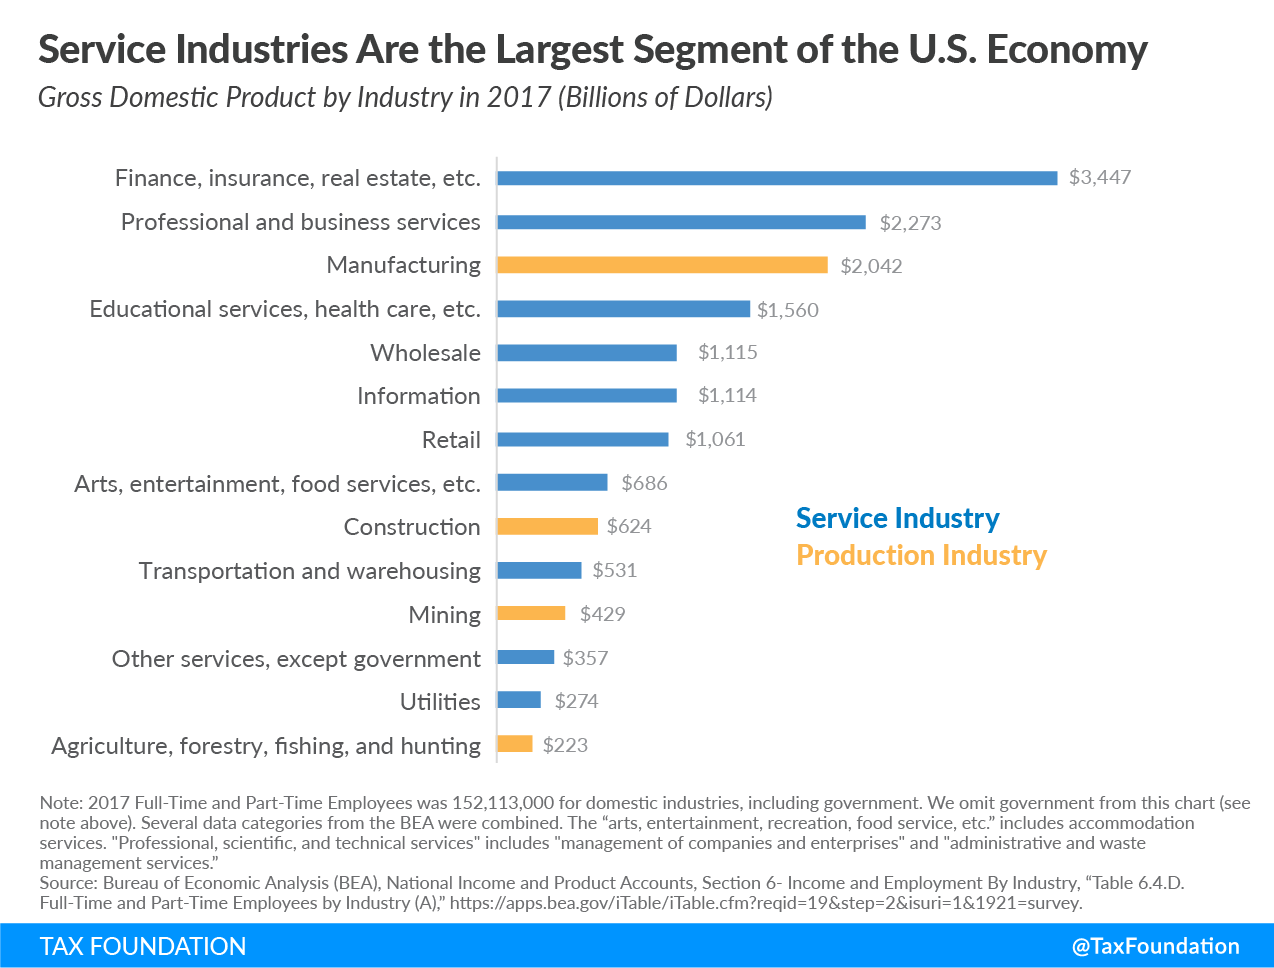 Service industries are the largest segment of the U.S. economy, finance, insurance, real estate, professional and business services, manufacturing, educational services, healthcare, wholesale, retail, arts, entertainment, food services, transportation, mining, utilities, agriculture, fishing, hunting